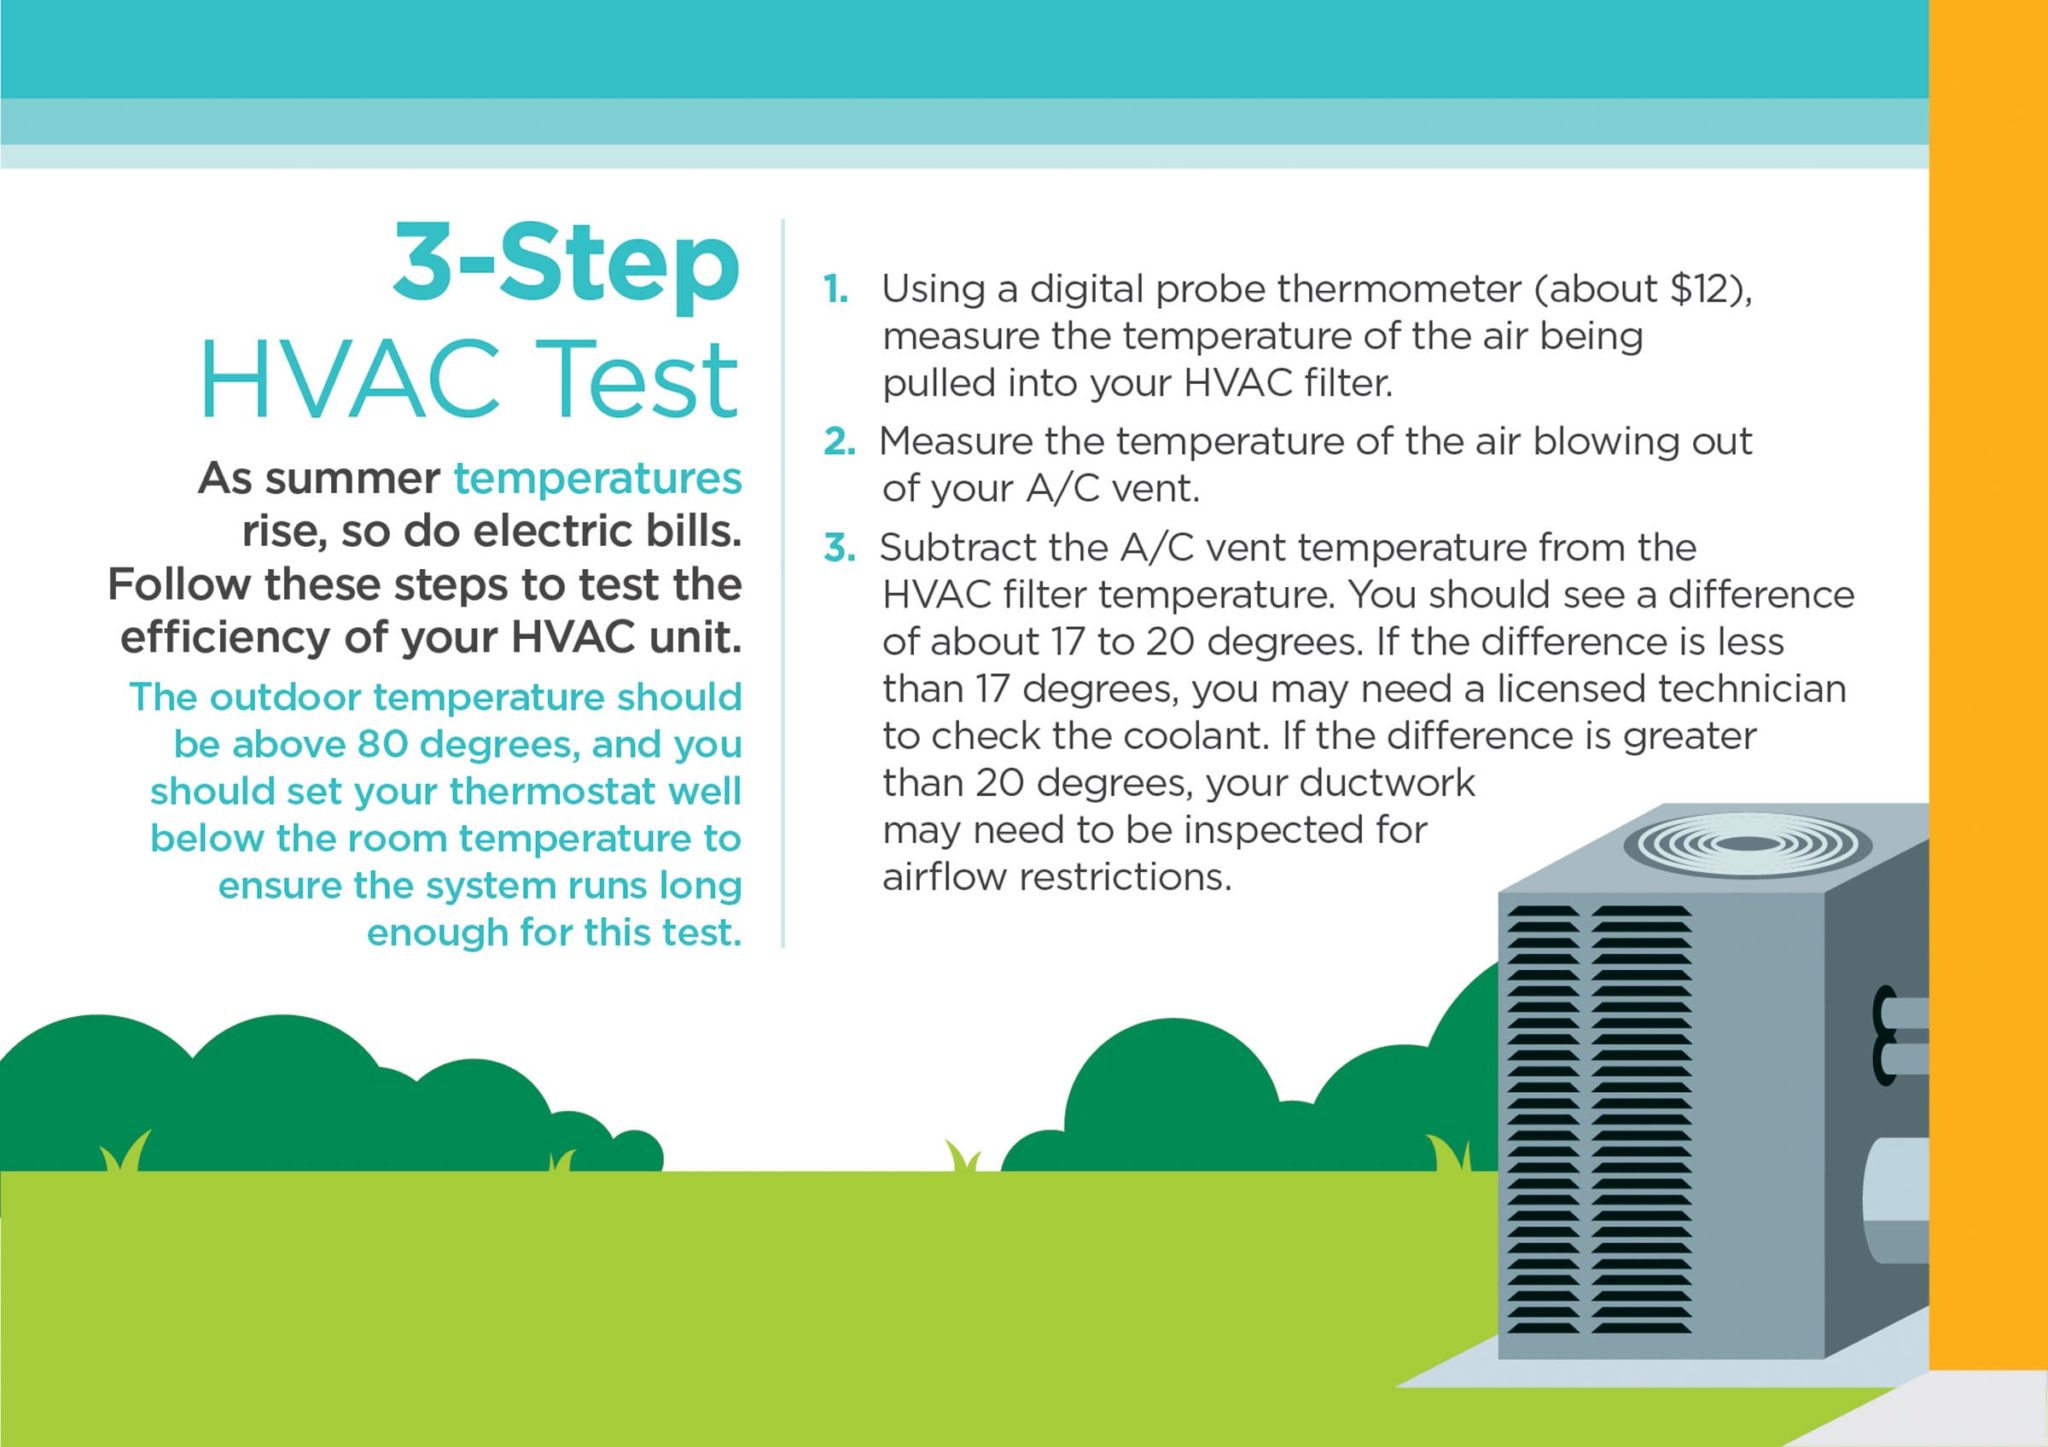 tips-for-maintaining-an-efficient-hvac-system-benton-rea